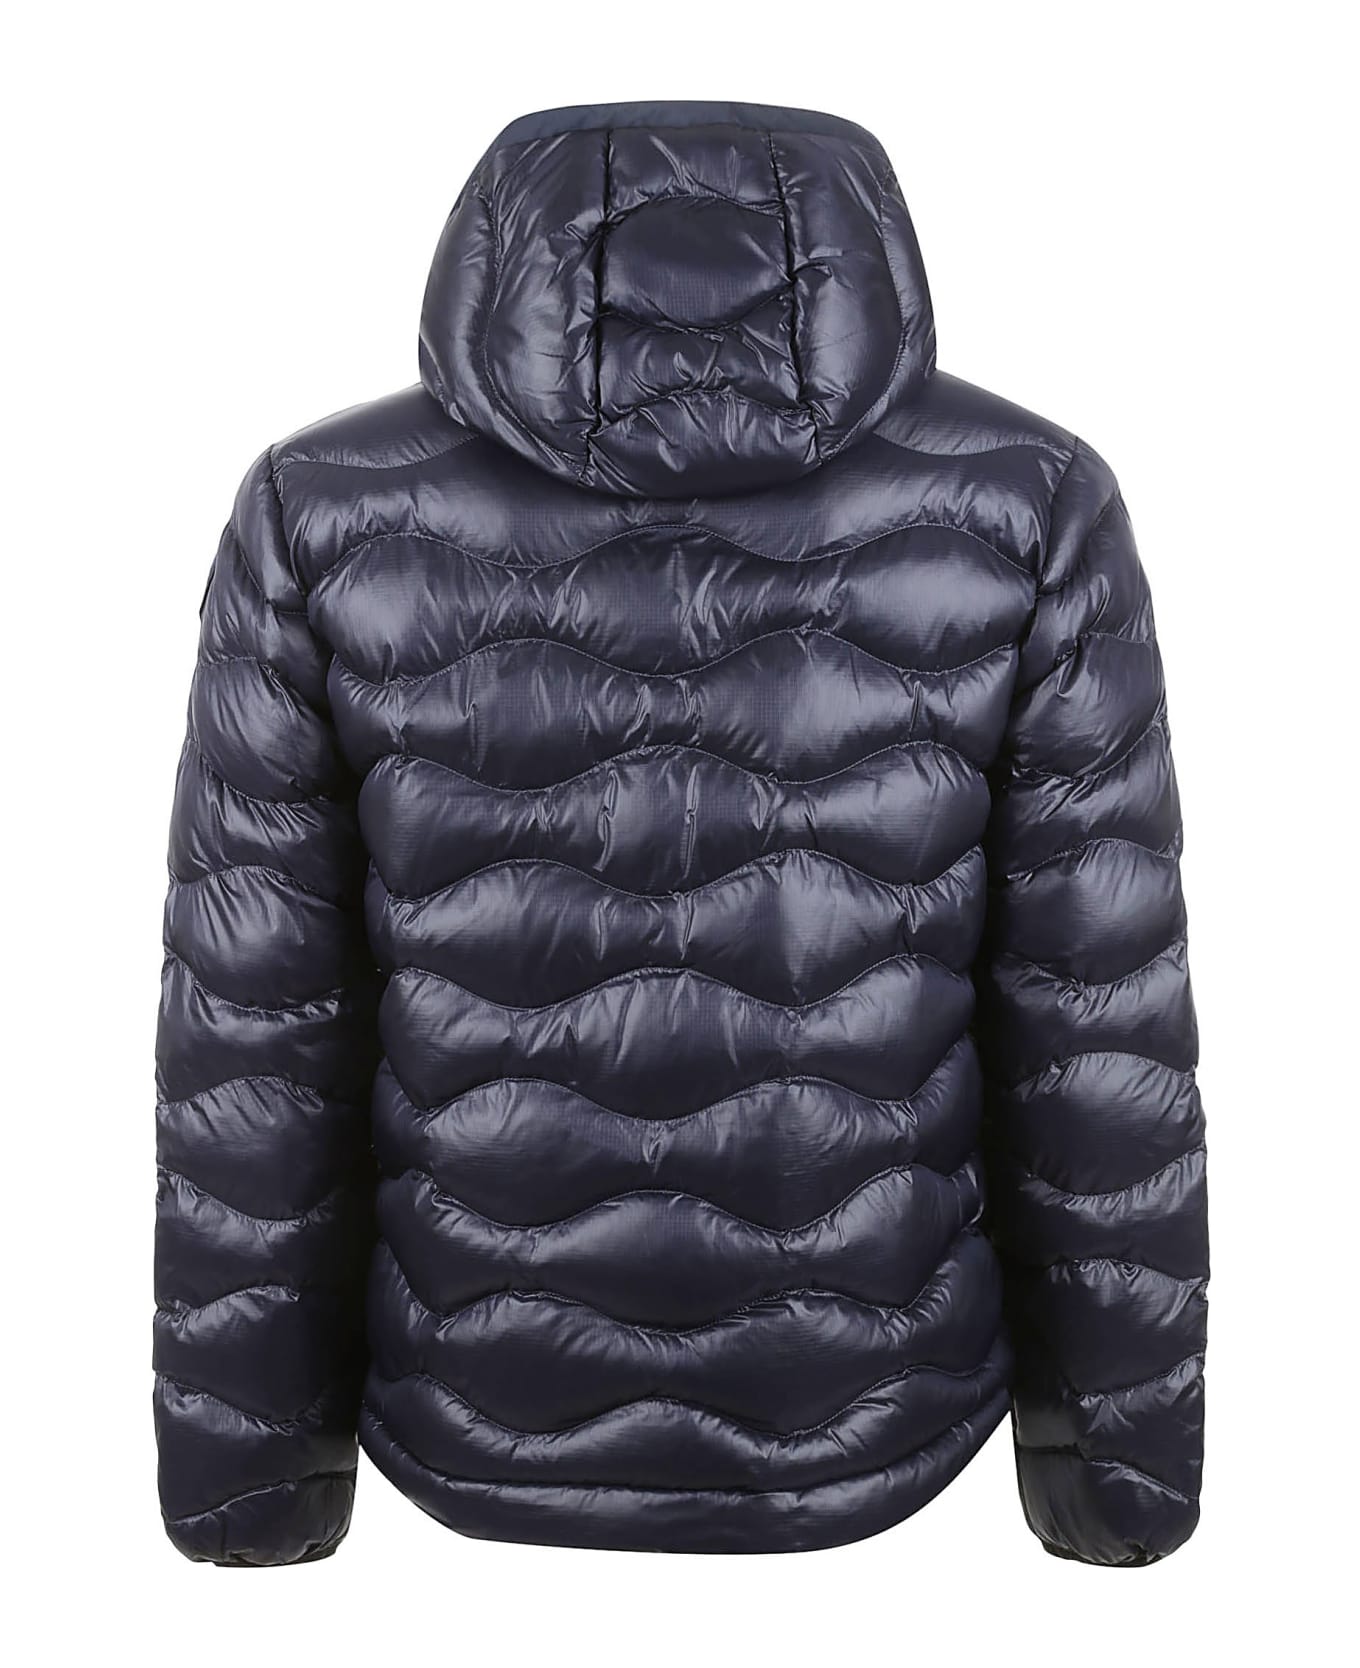 Blauer Patched Pocket Quilted Puffer Jacket - Blue